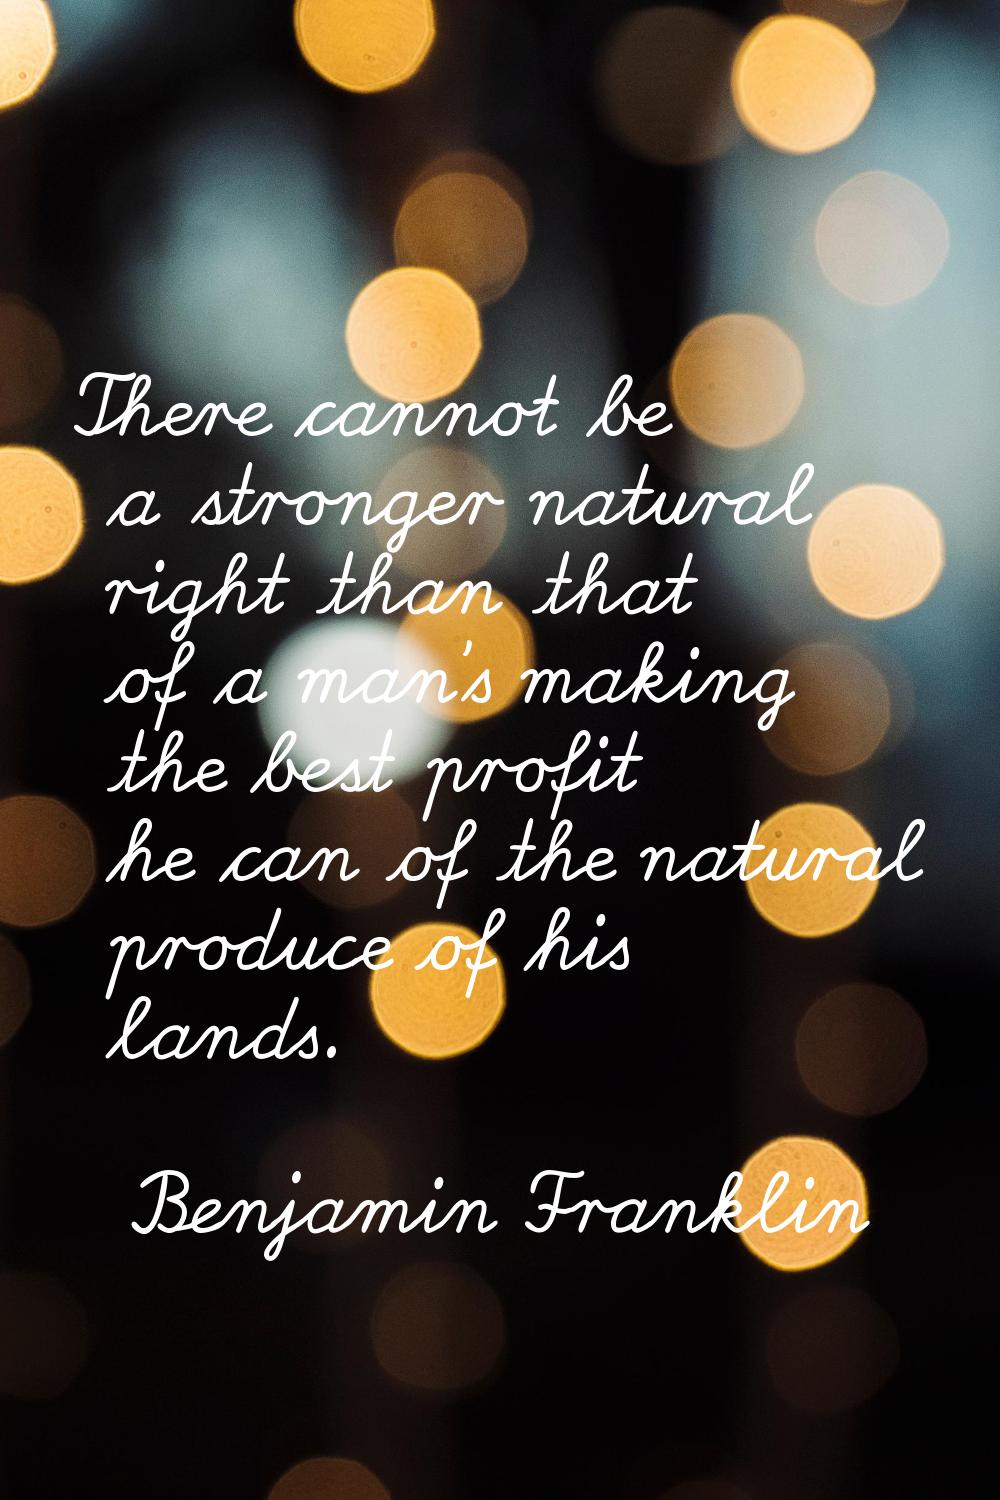 There cannot be a stronger natural right than that of a man's making the best profit he can of the 